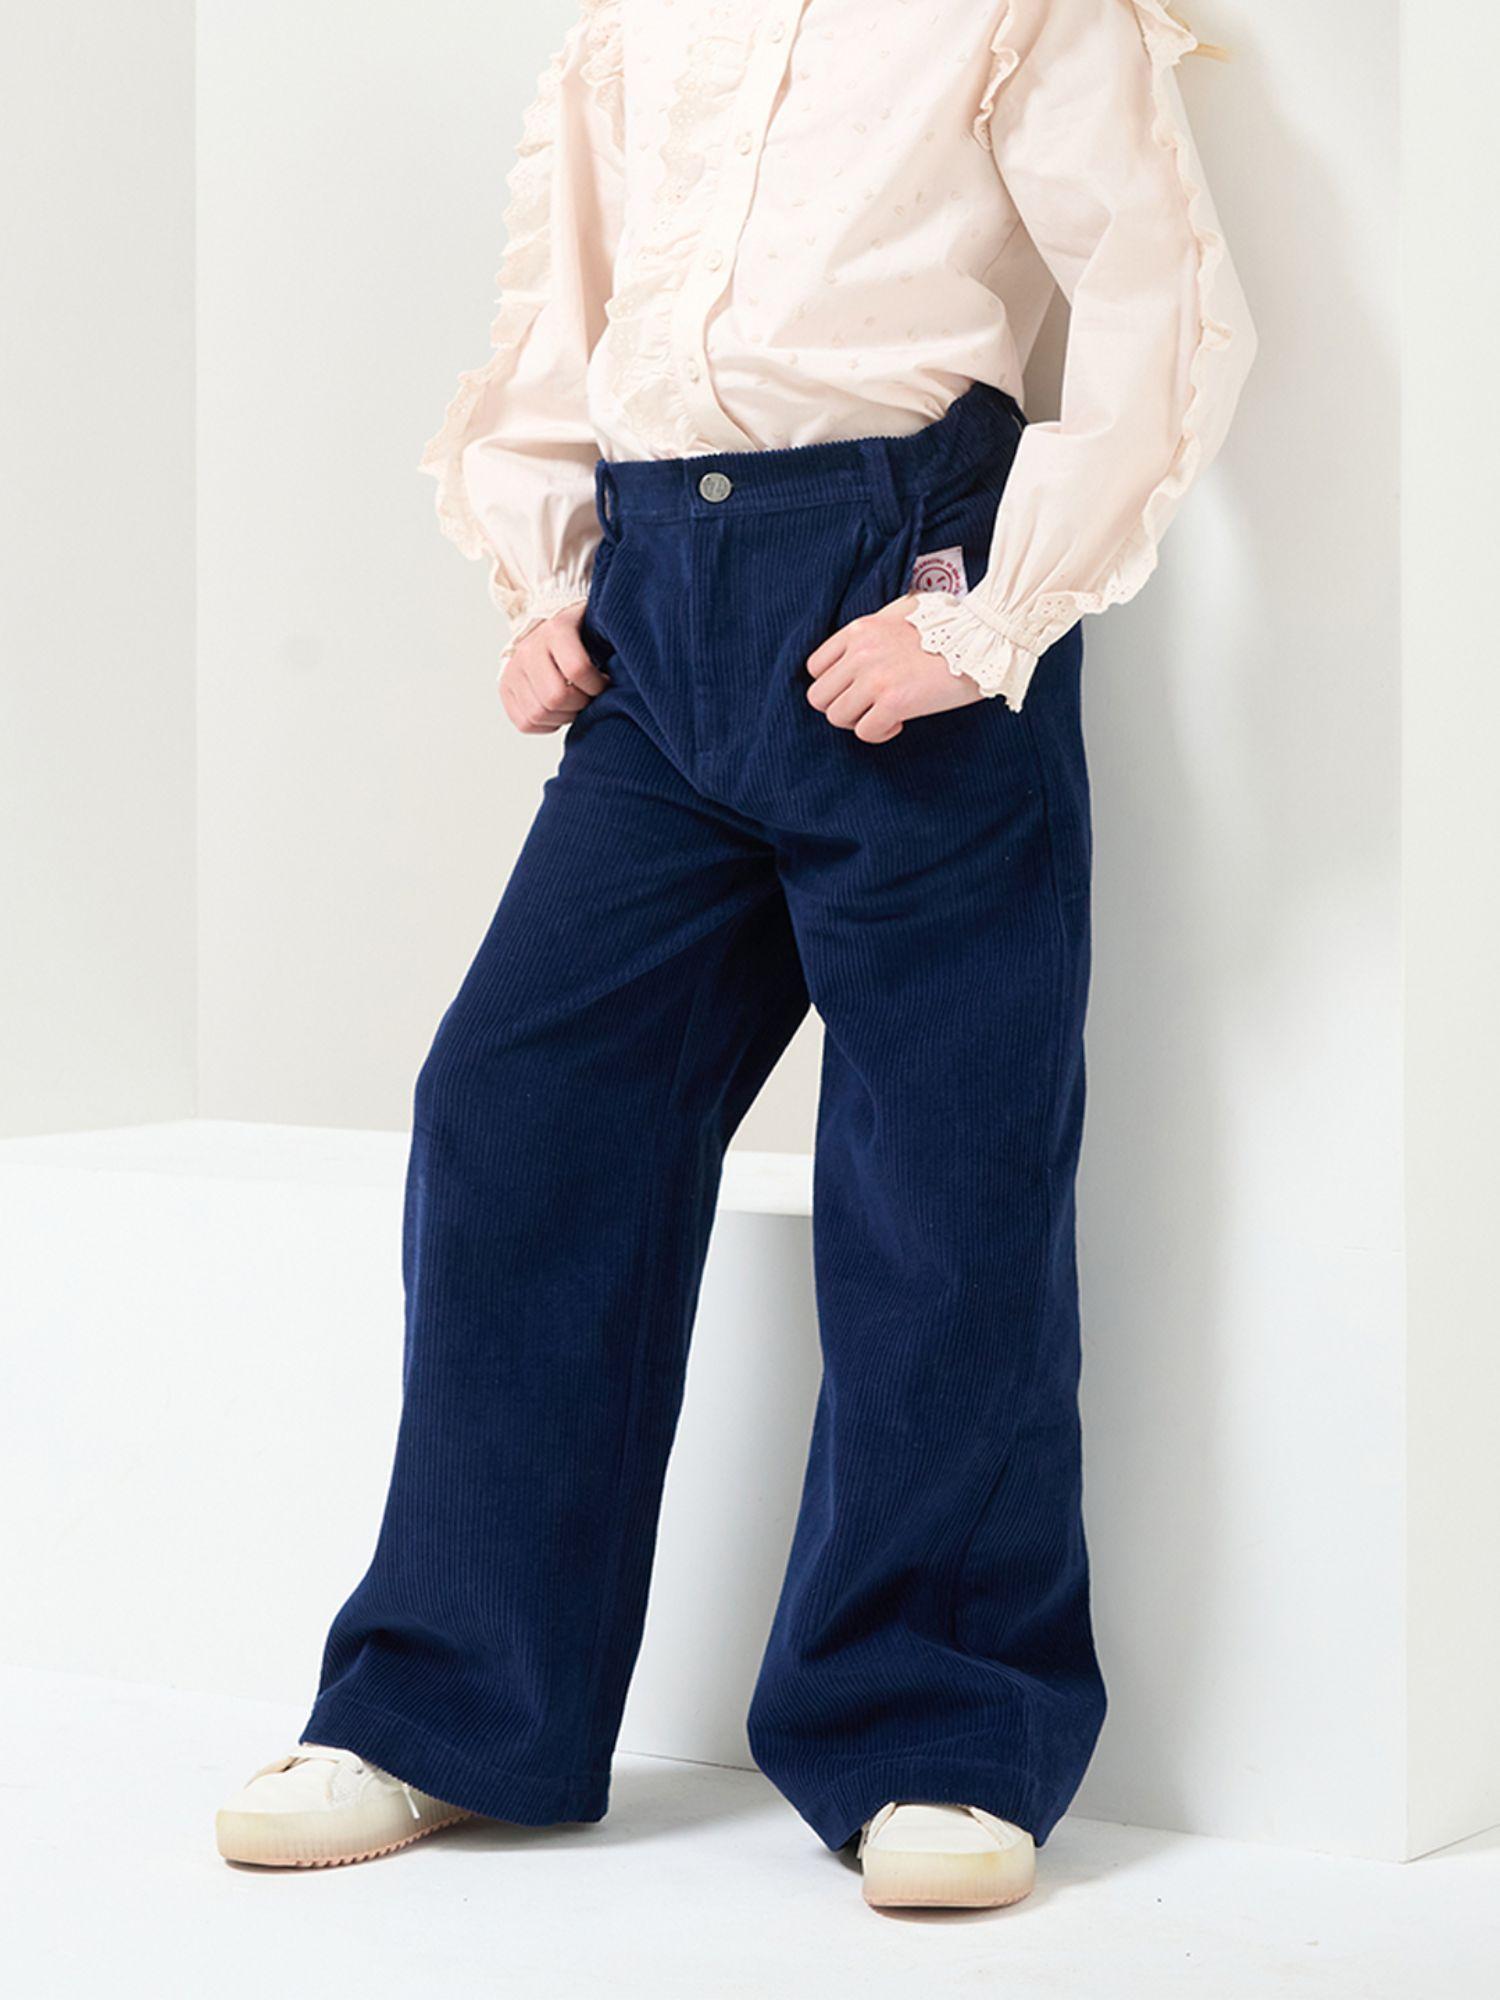 textured navy blue trousers